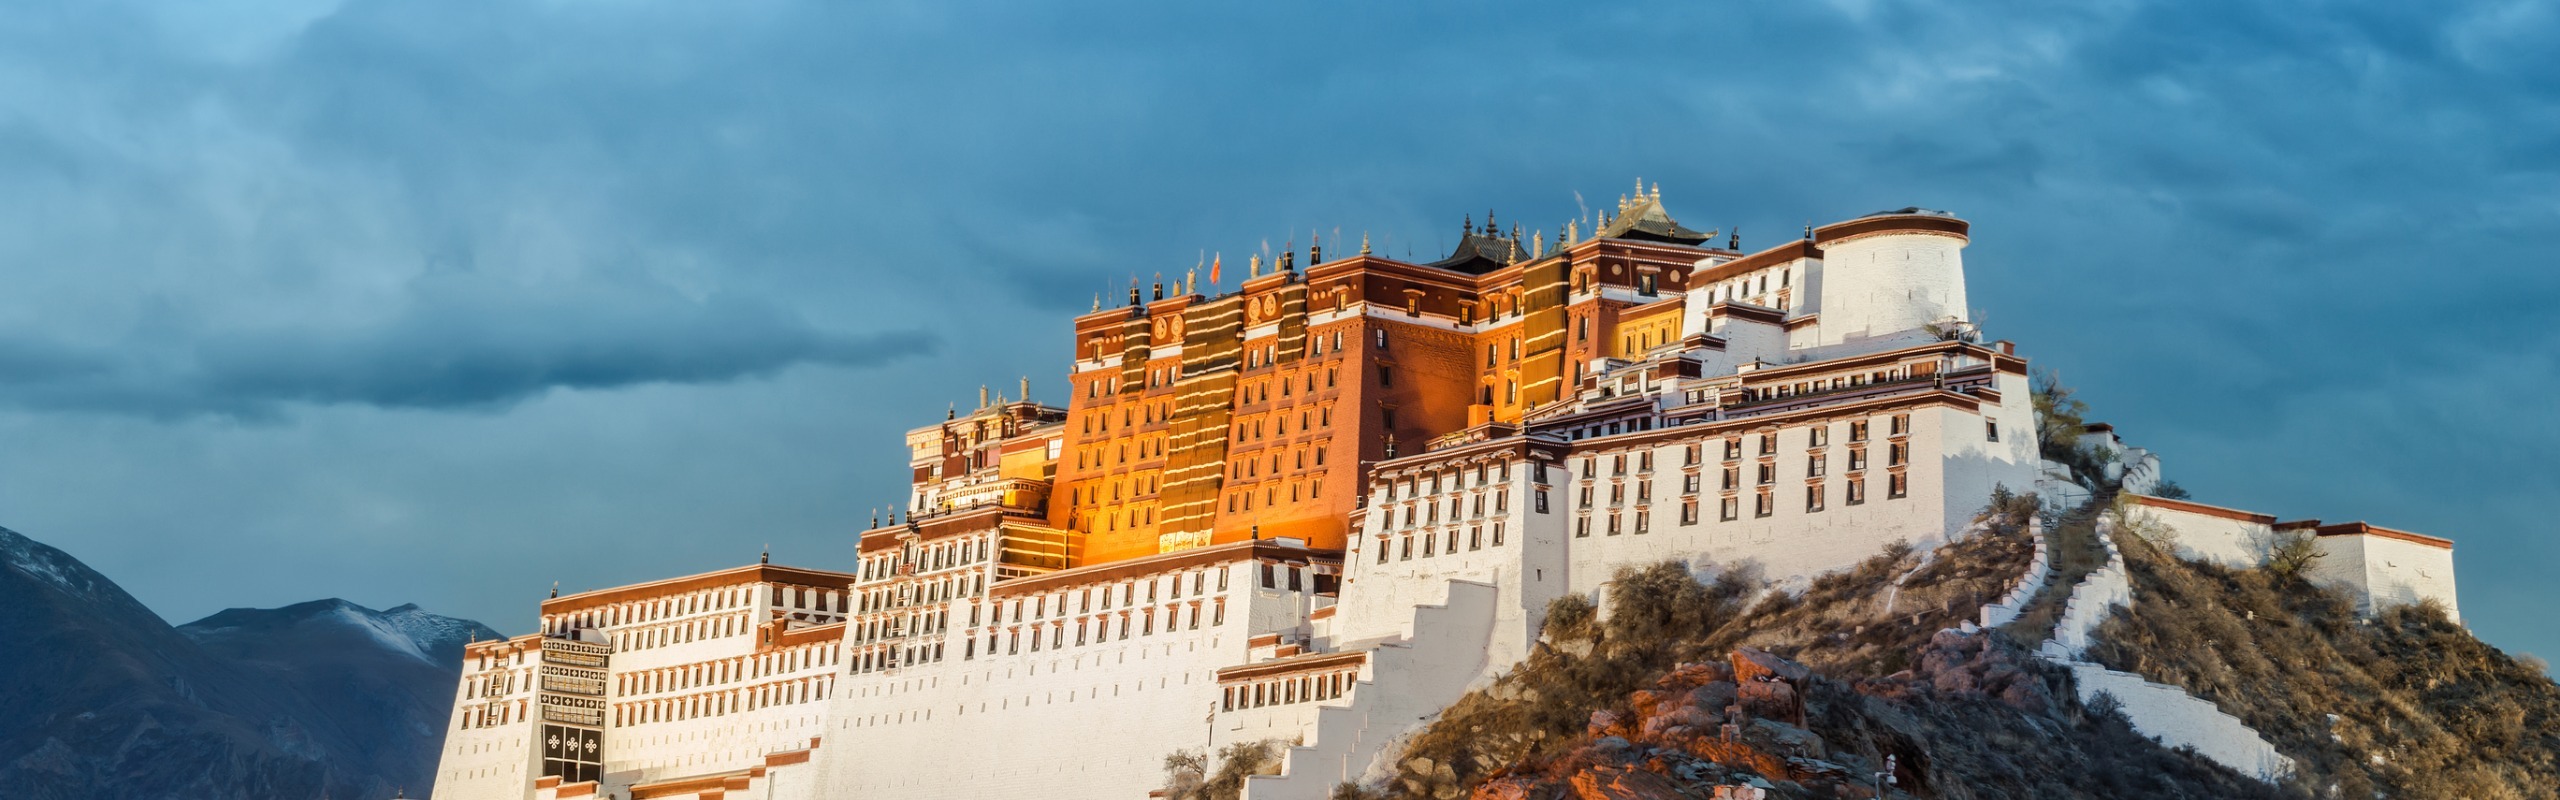 3-Week Must-See Places China Tour Including Holy Tibet